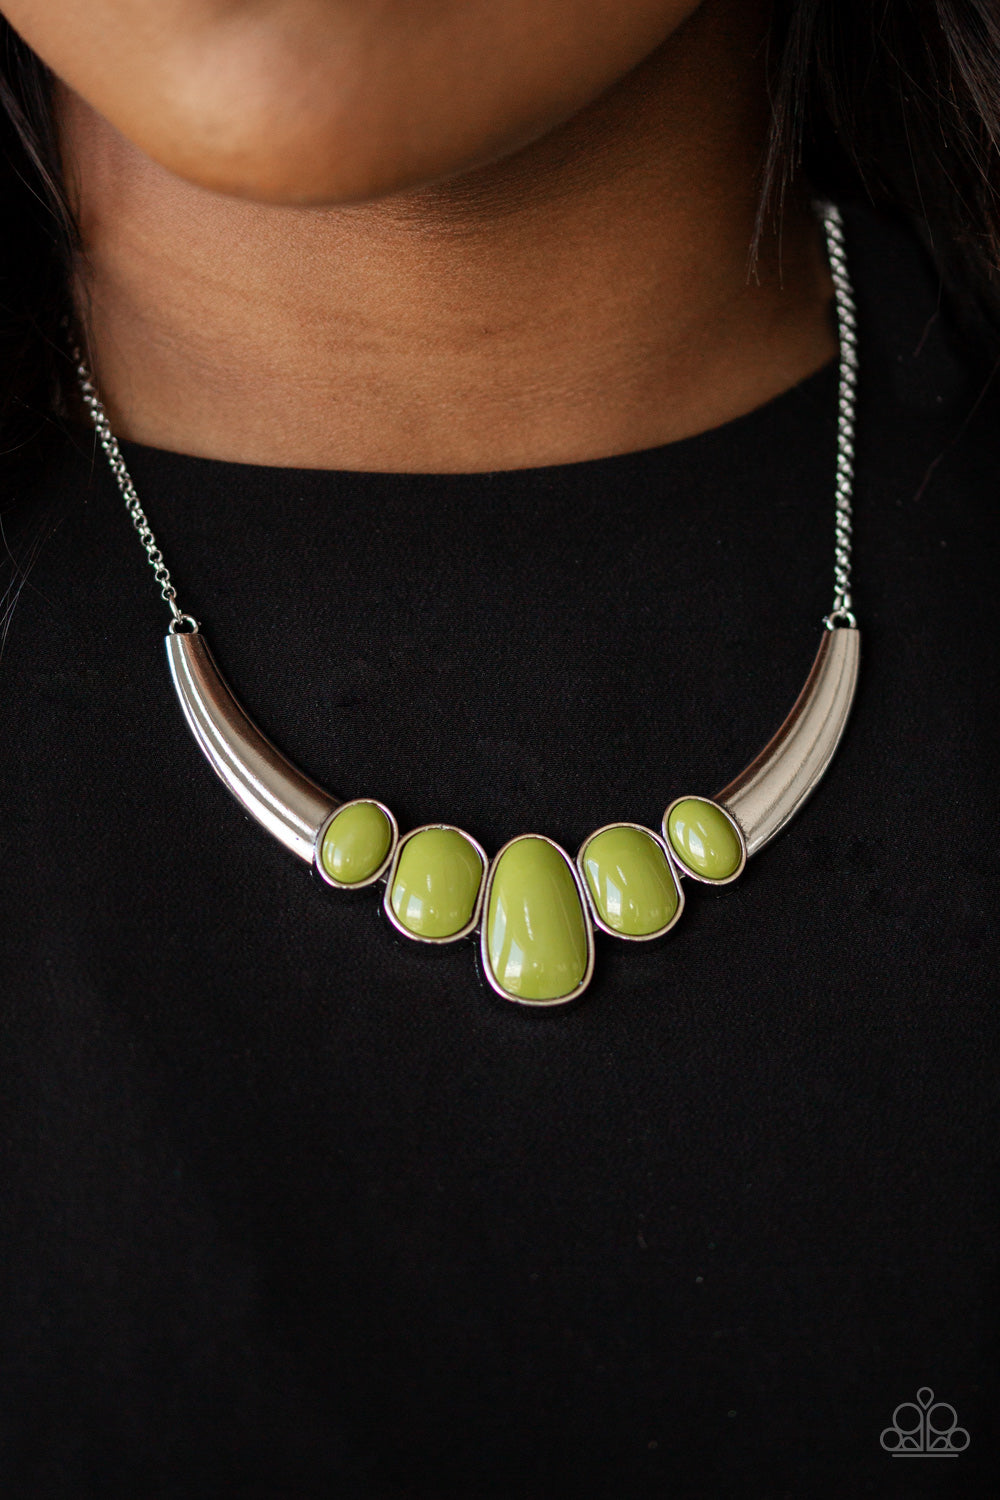 A BULL HOUSE - GREEN AVOCADO OVAL BEADS SILVER CRESCENT NECKLACE